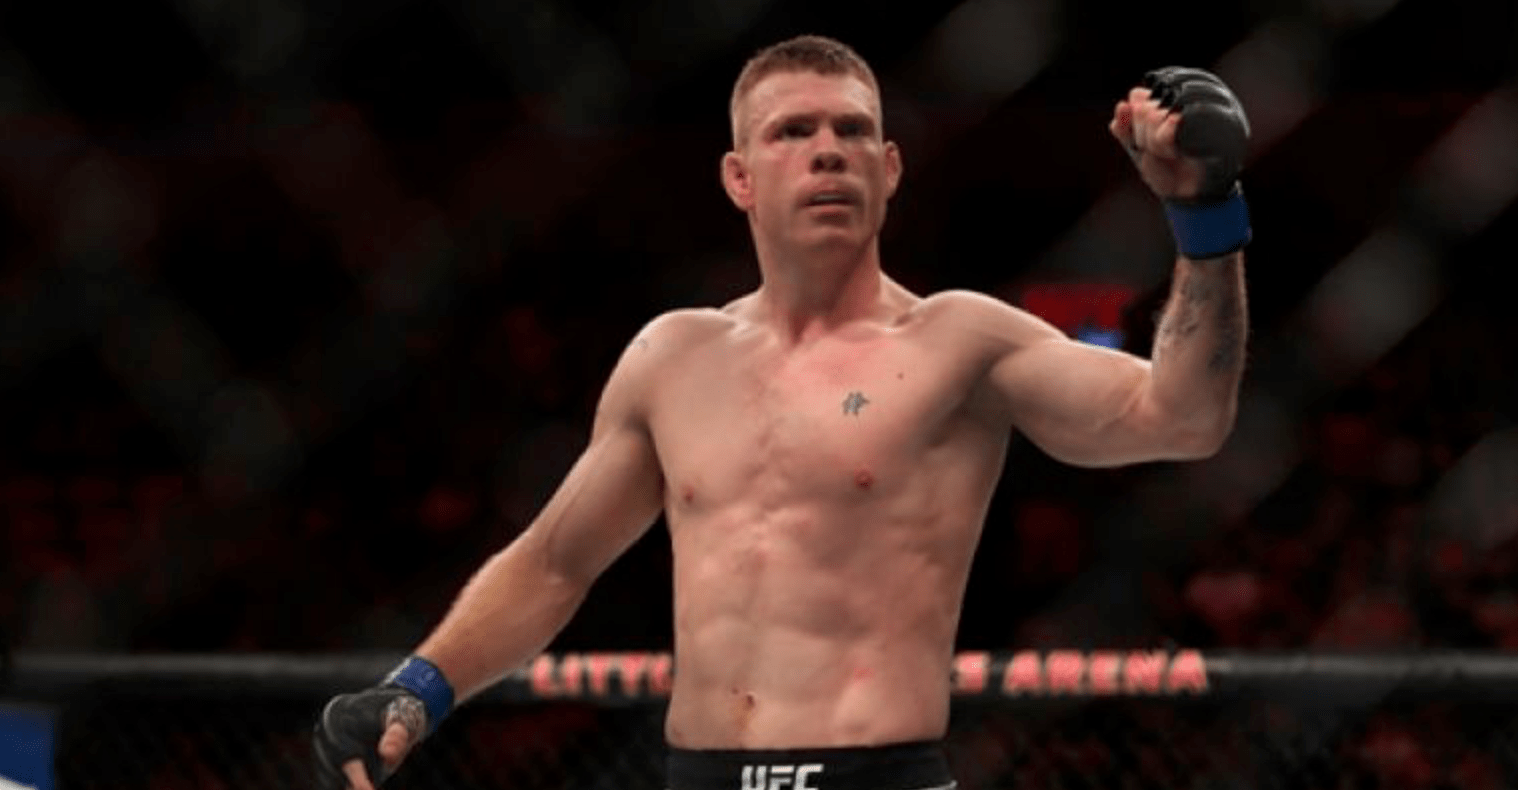 UFC: Paul Felder Says He Can’t Wait To Fight Again